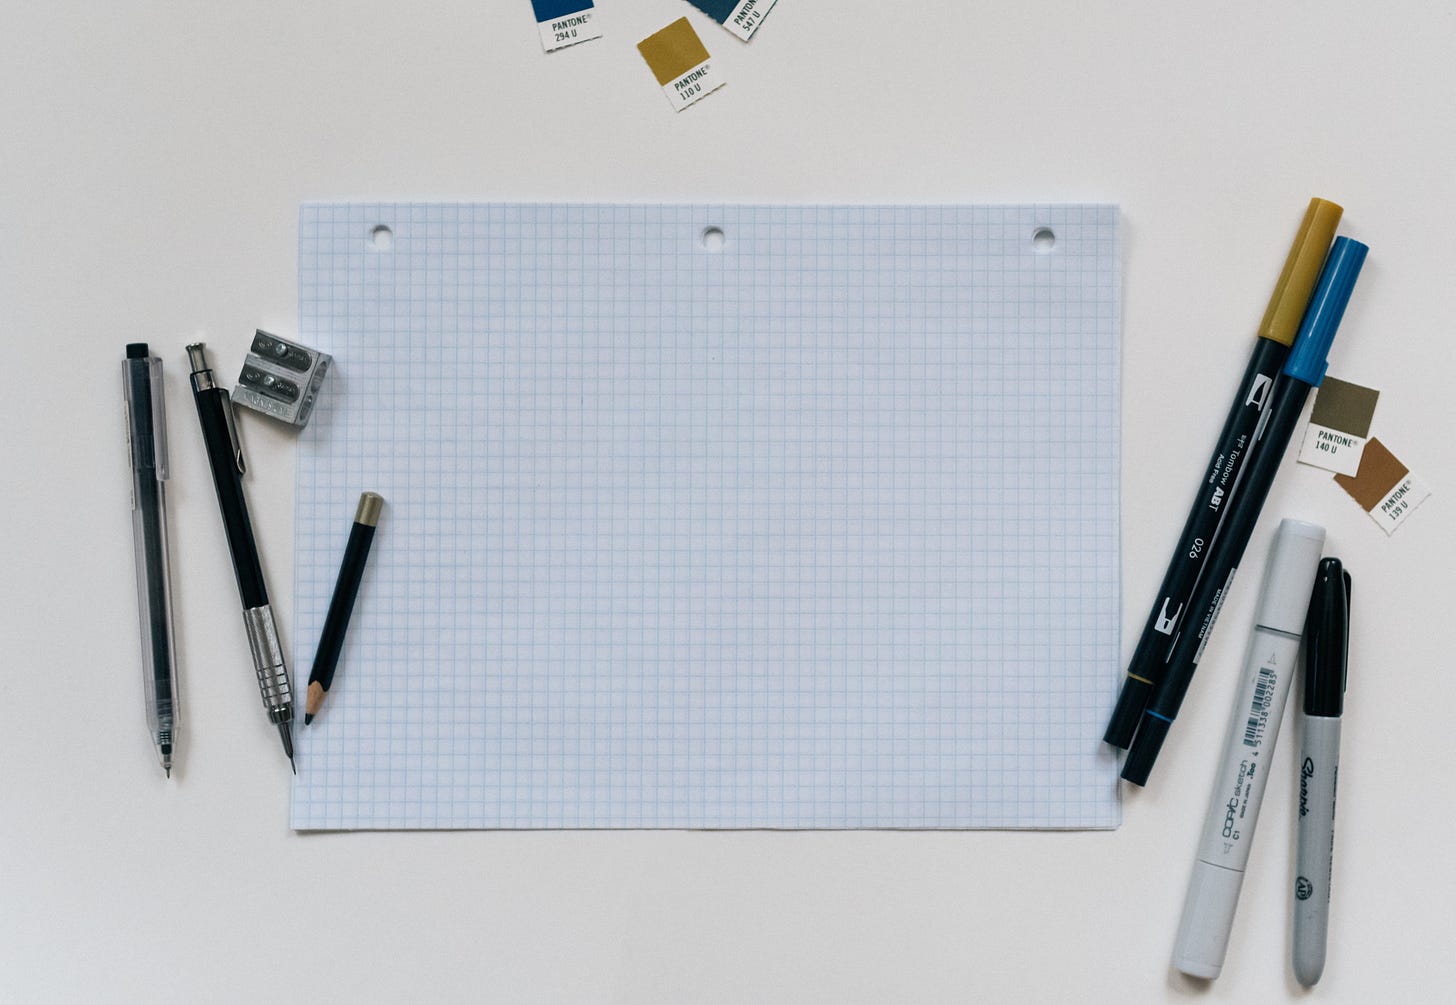 A blank piece of graph papers with pencils to the left and markers on the right